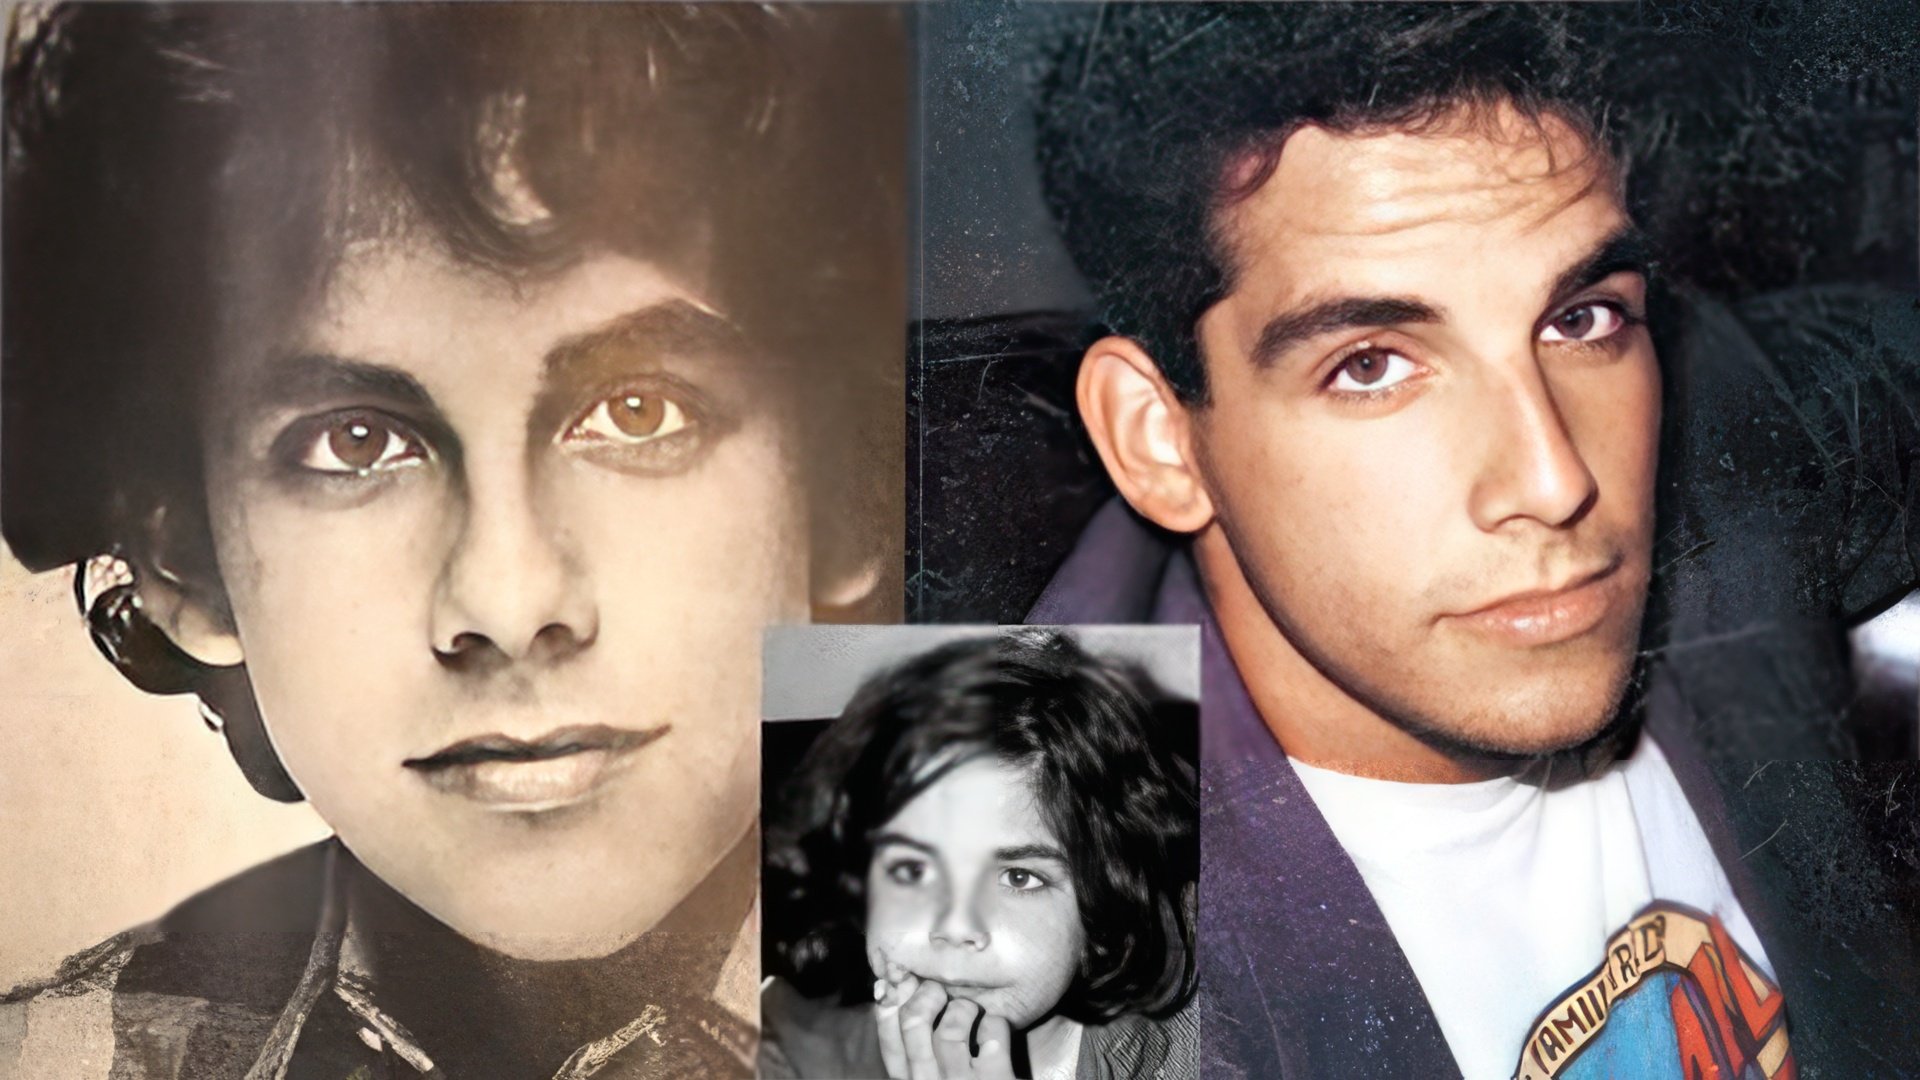 Ben Stiller in his childhood and youth